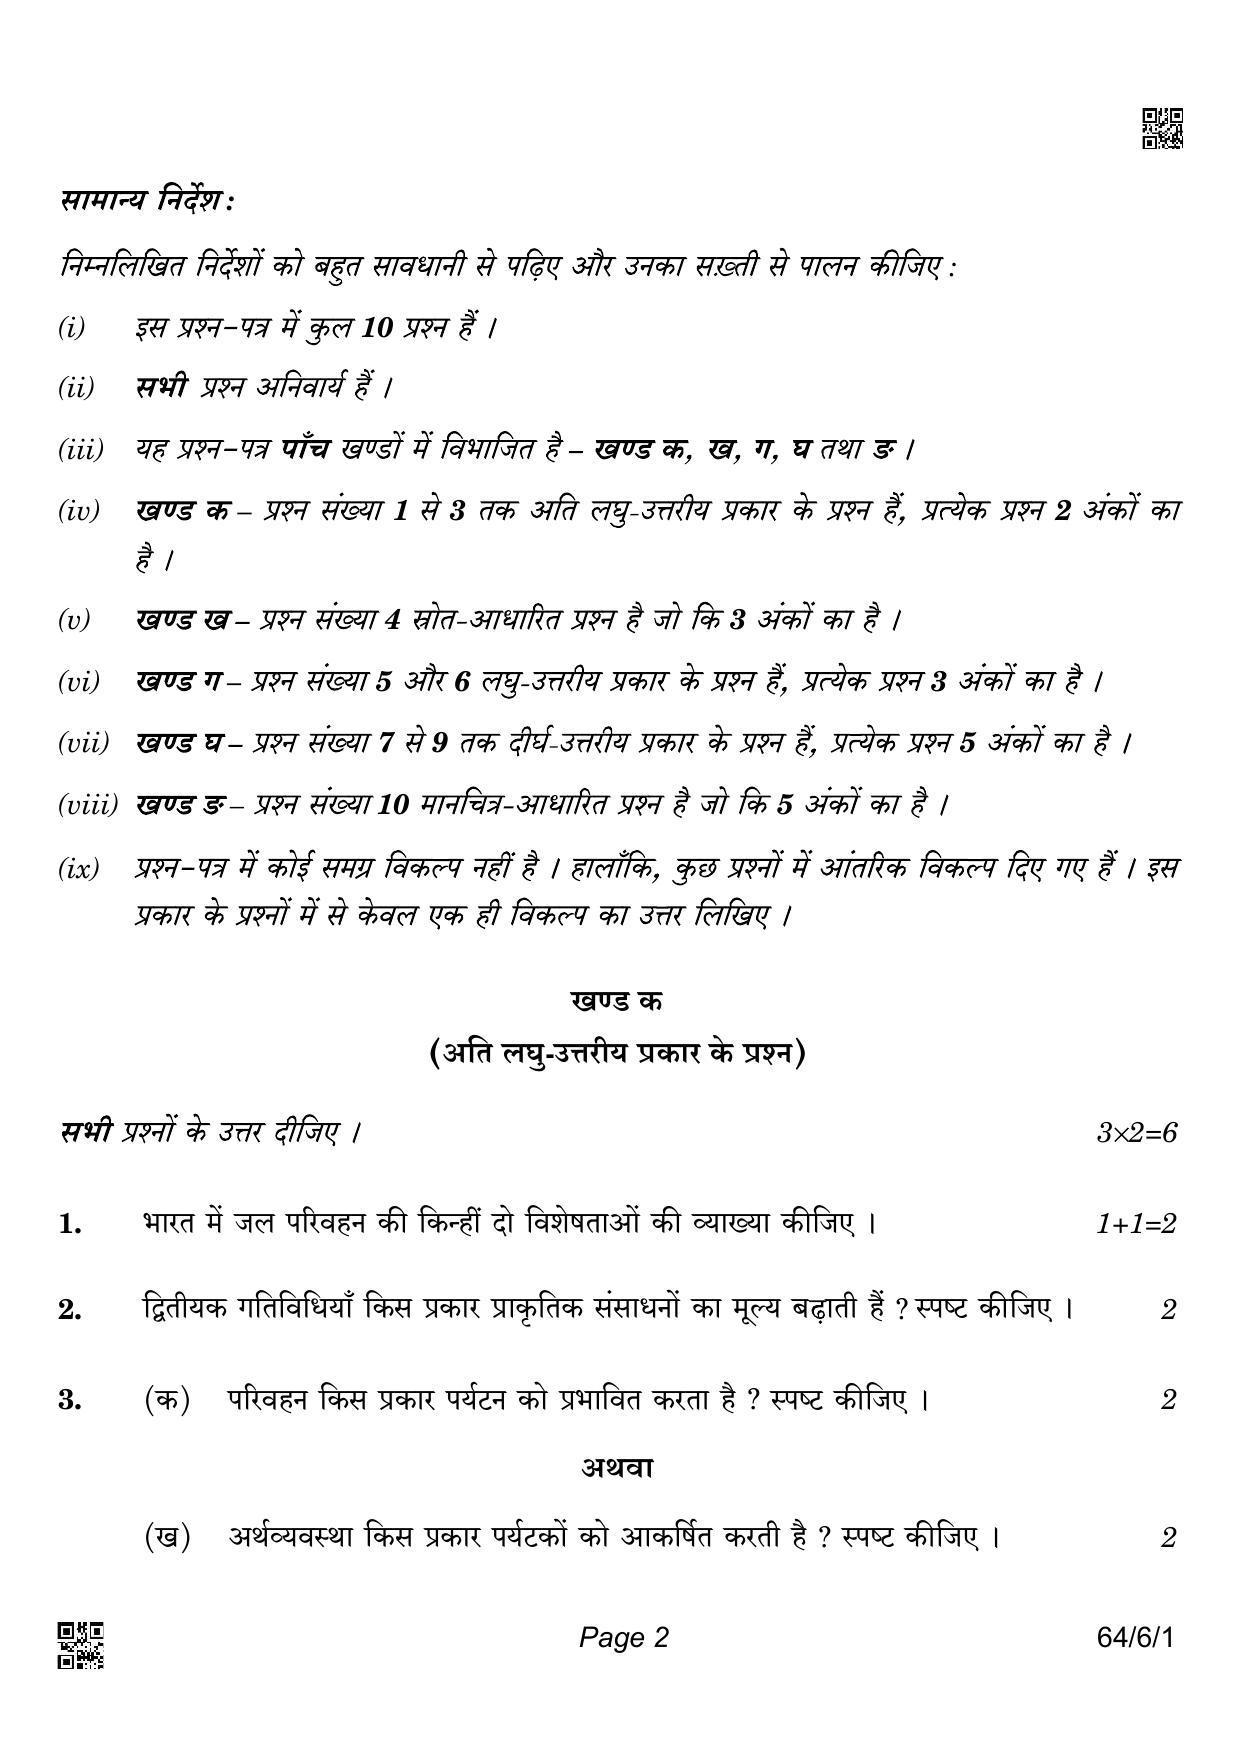 CBSE Class 12 64-6-1 GEOGRAPHY 2022 Compartment Question Paper - Page 2